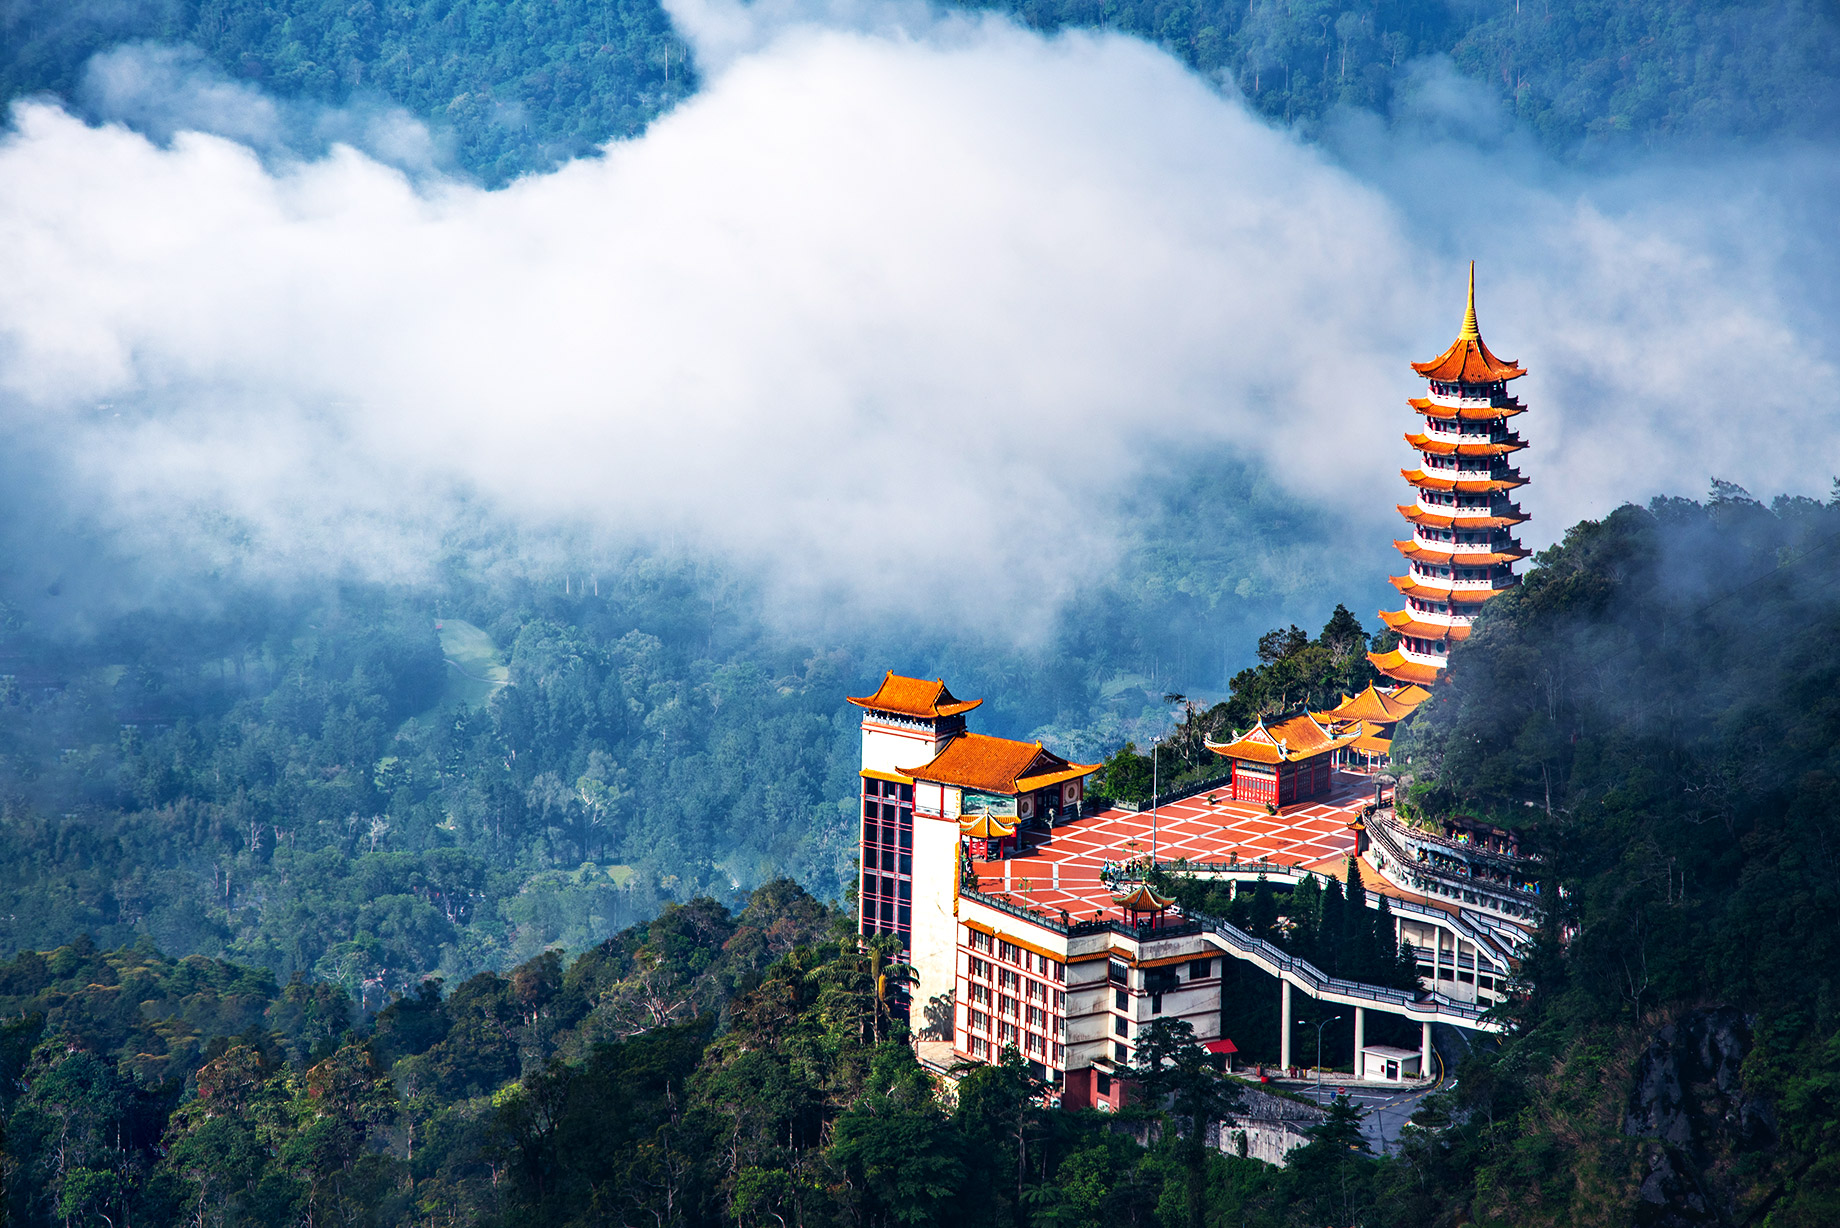 Chinese Pagoda Temple - Genting Highlands, Malaysia